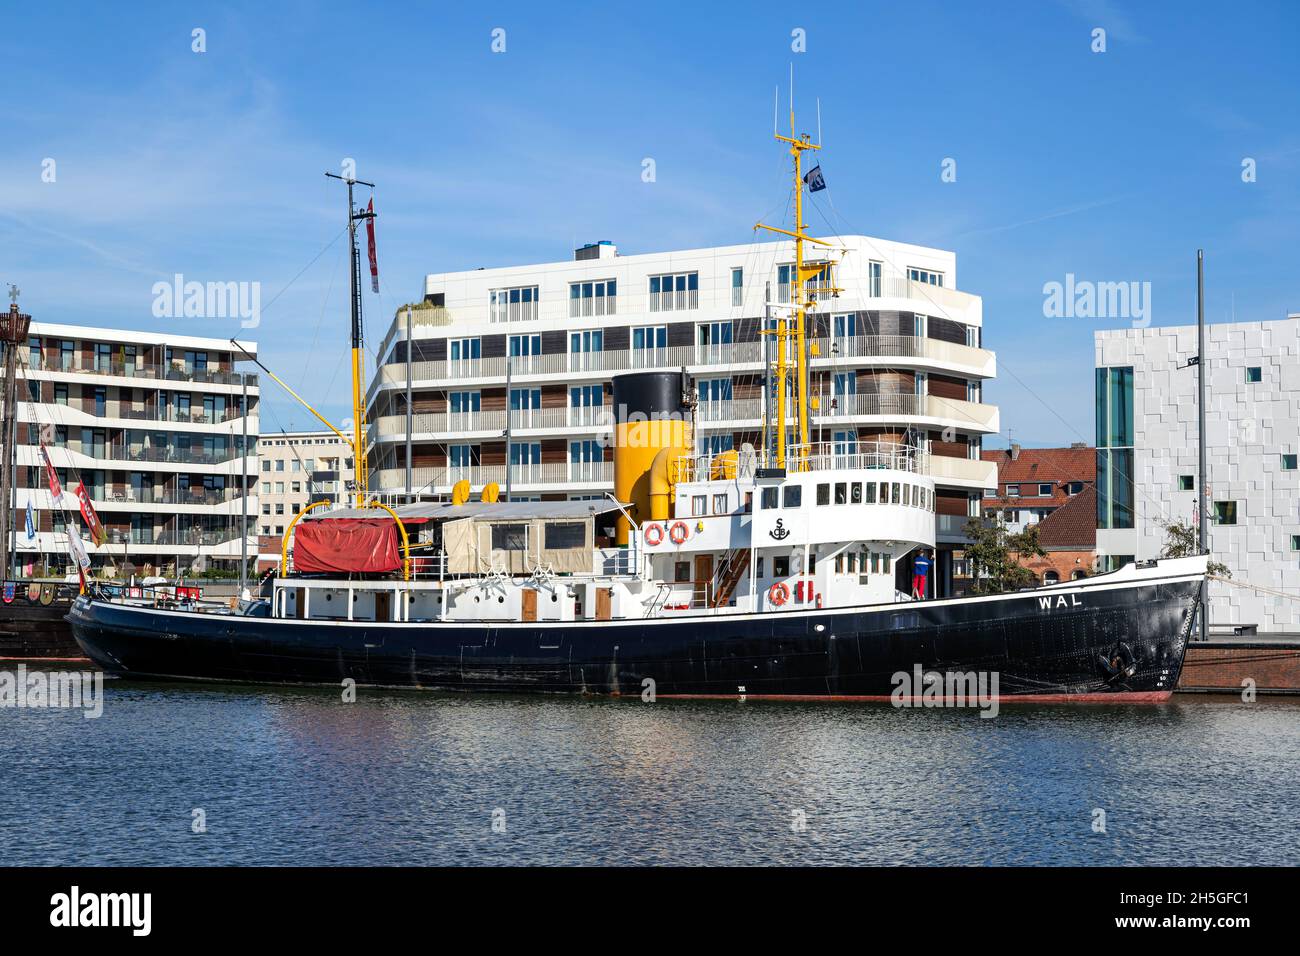 steam-powered icebreaker WAL in the port of Bremerhaven Stock Photo